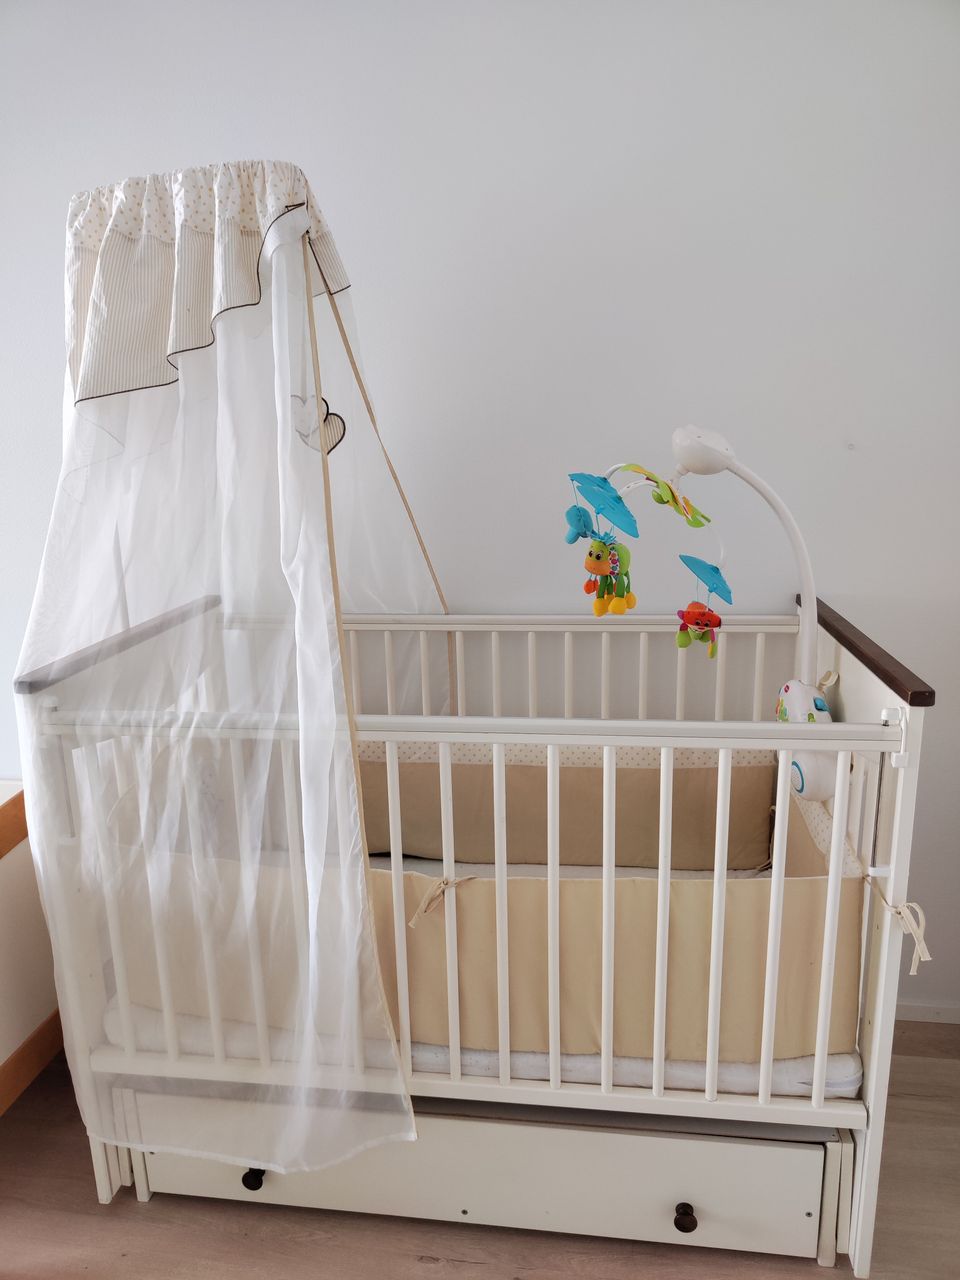 Baby crib along with additional items